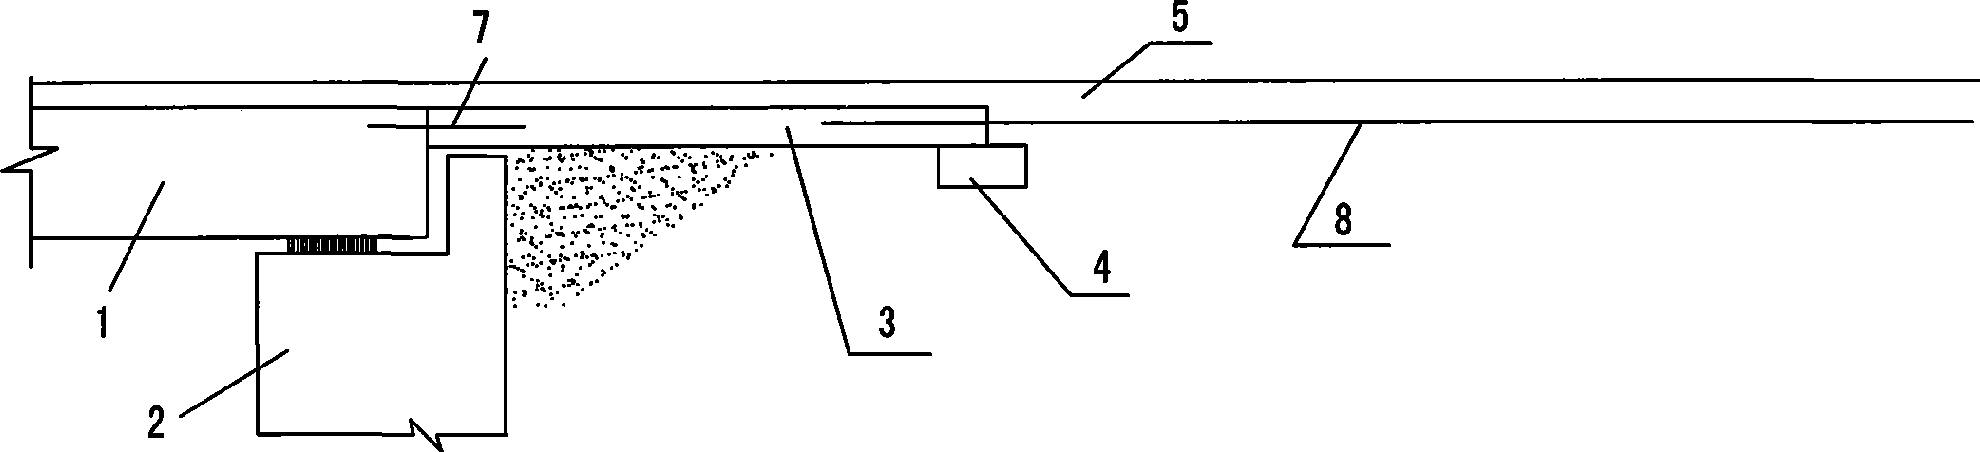 Structure of continuously reinforced link road pavement for seamless bridge